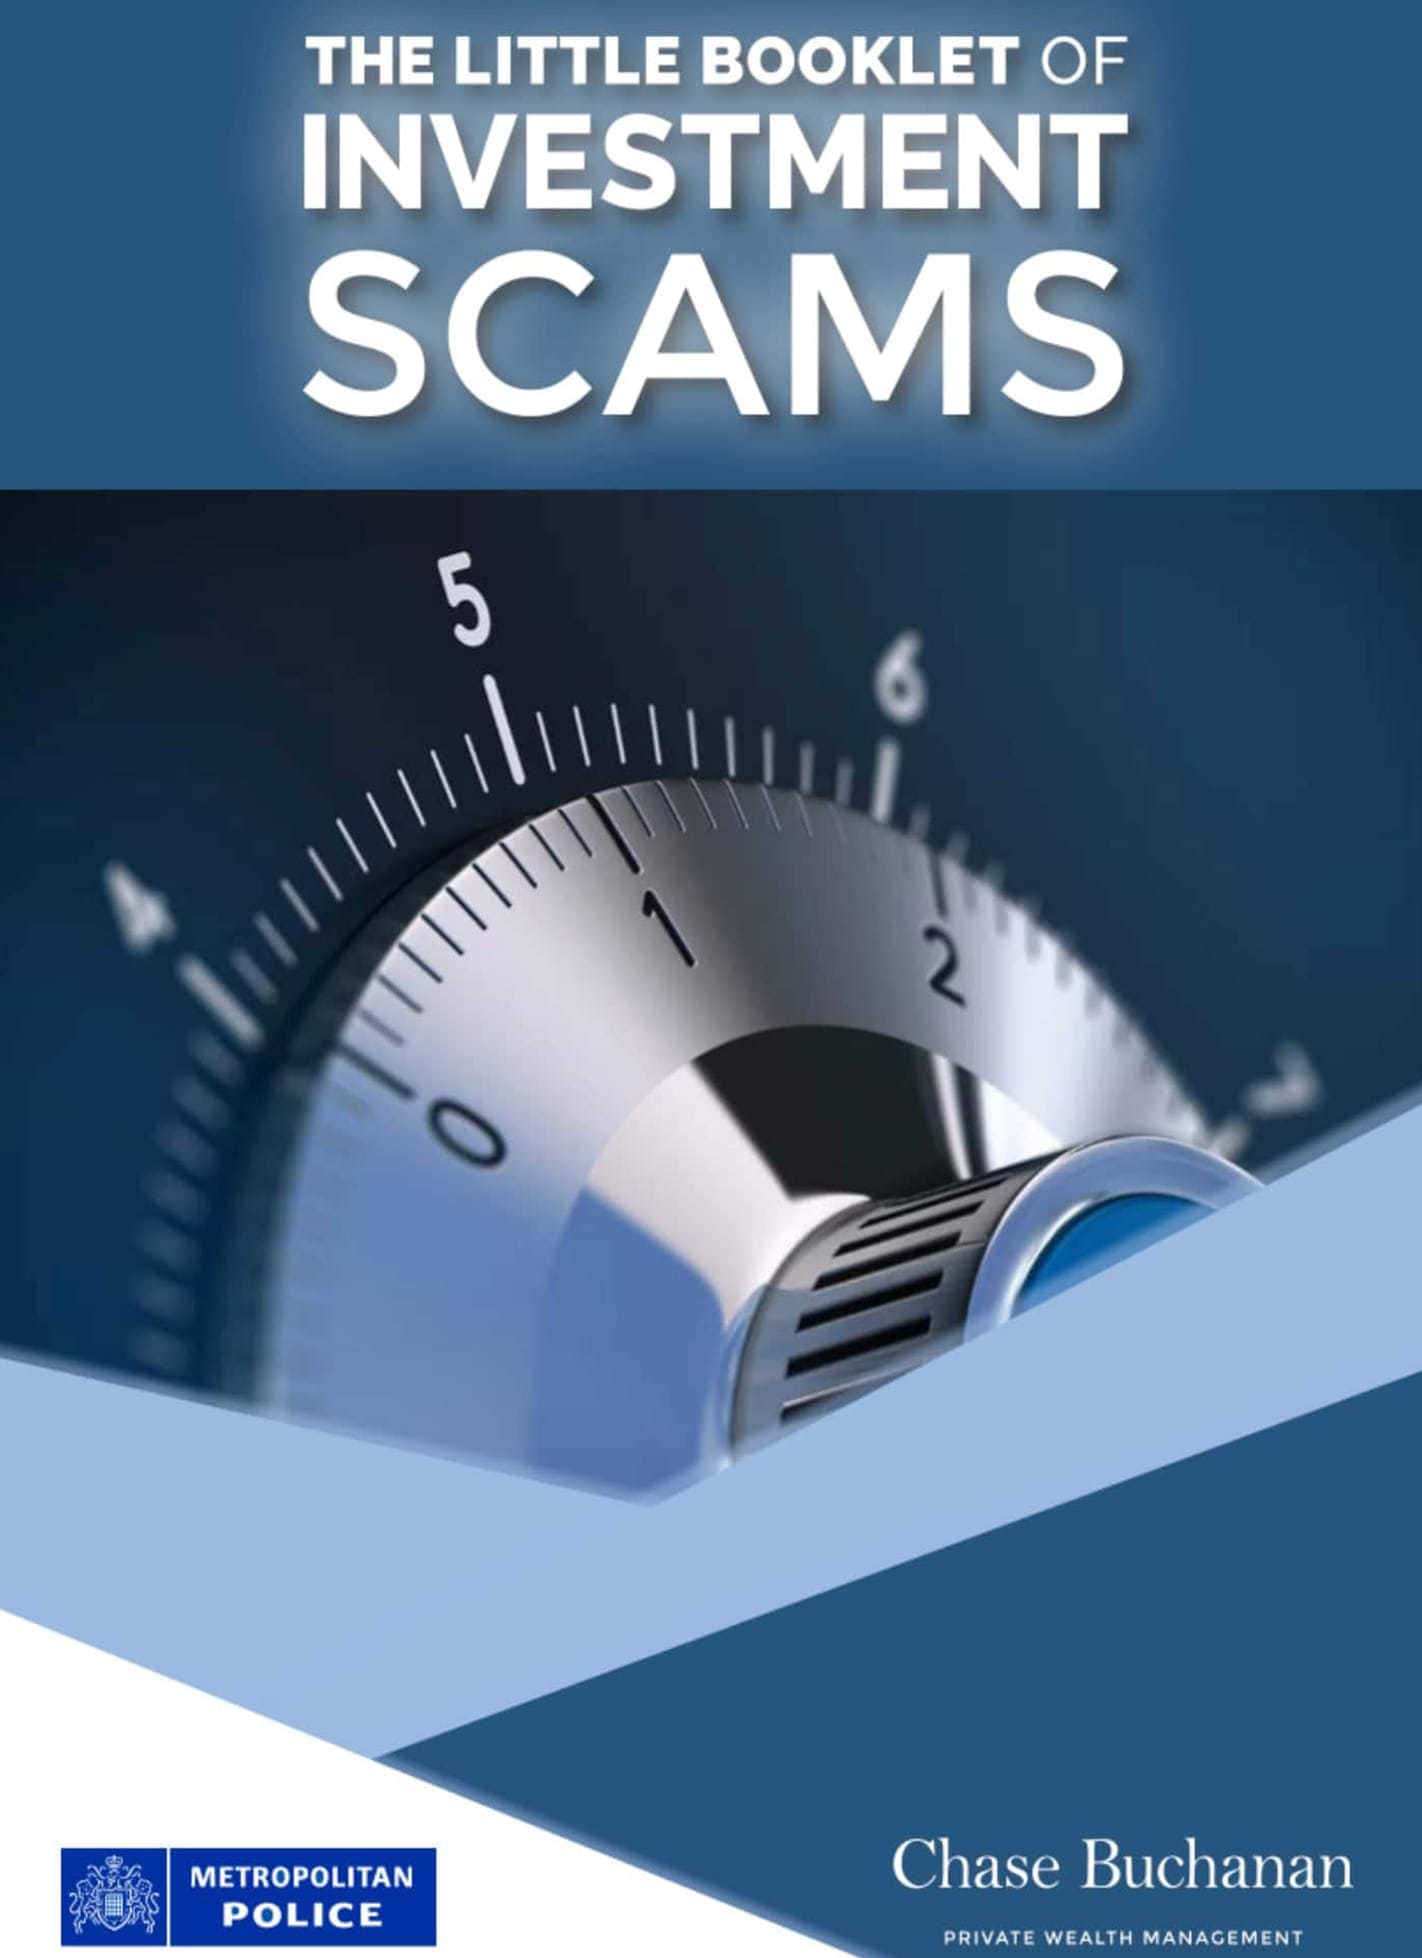 Investment scams guide